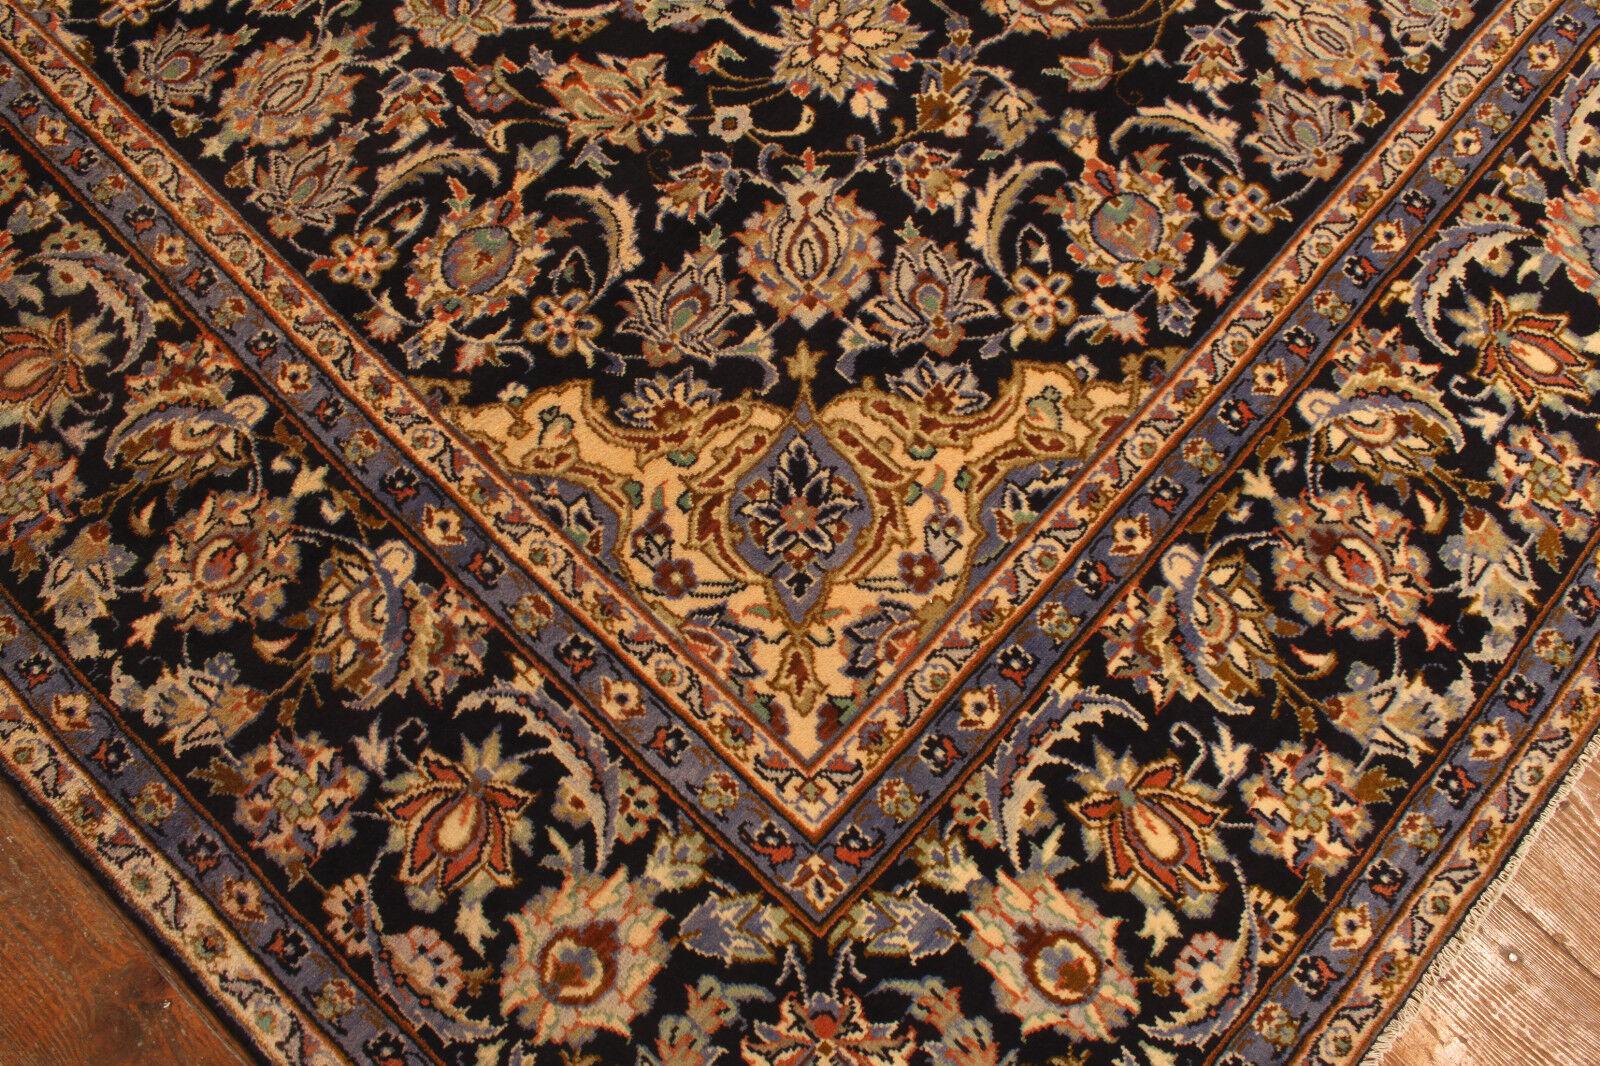 Late 20th Century Handmade Vintage Persian Style Tabriz Rug 9.5' x 14.5', 1970s - 1T35 For Sale